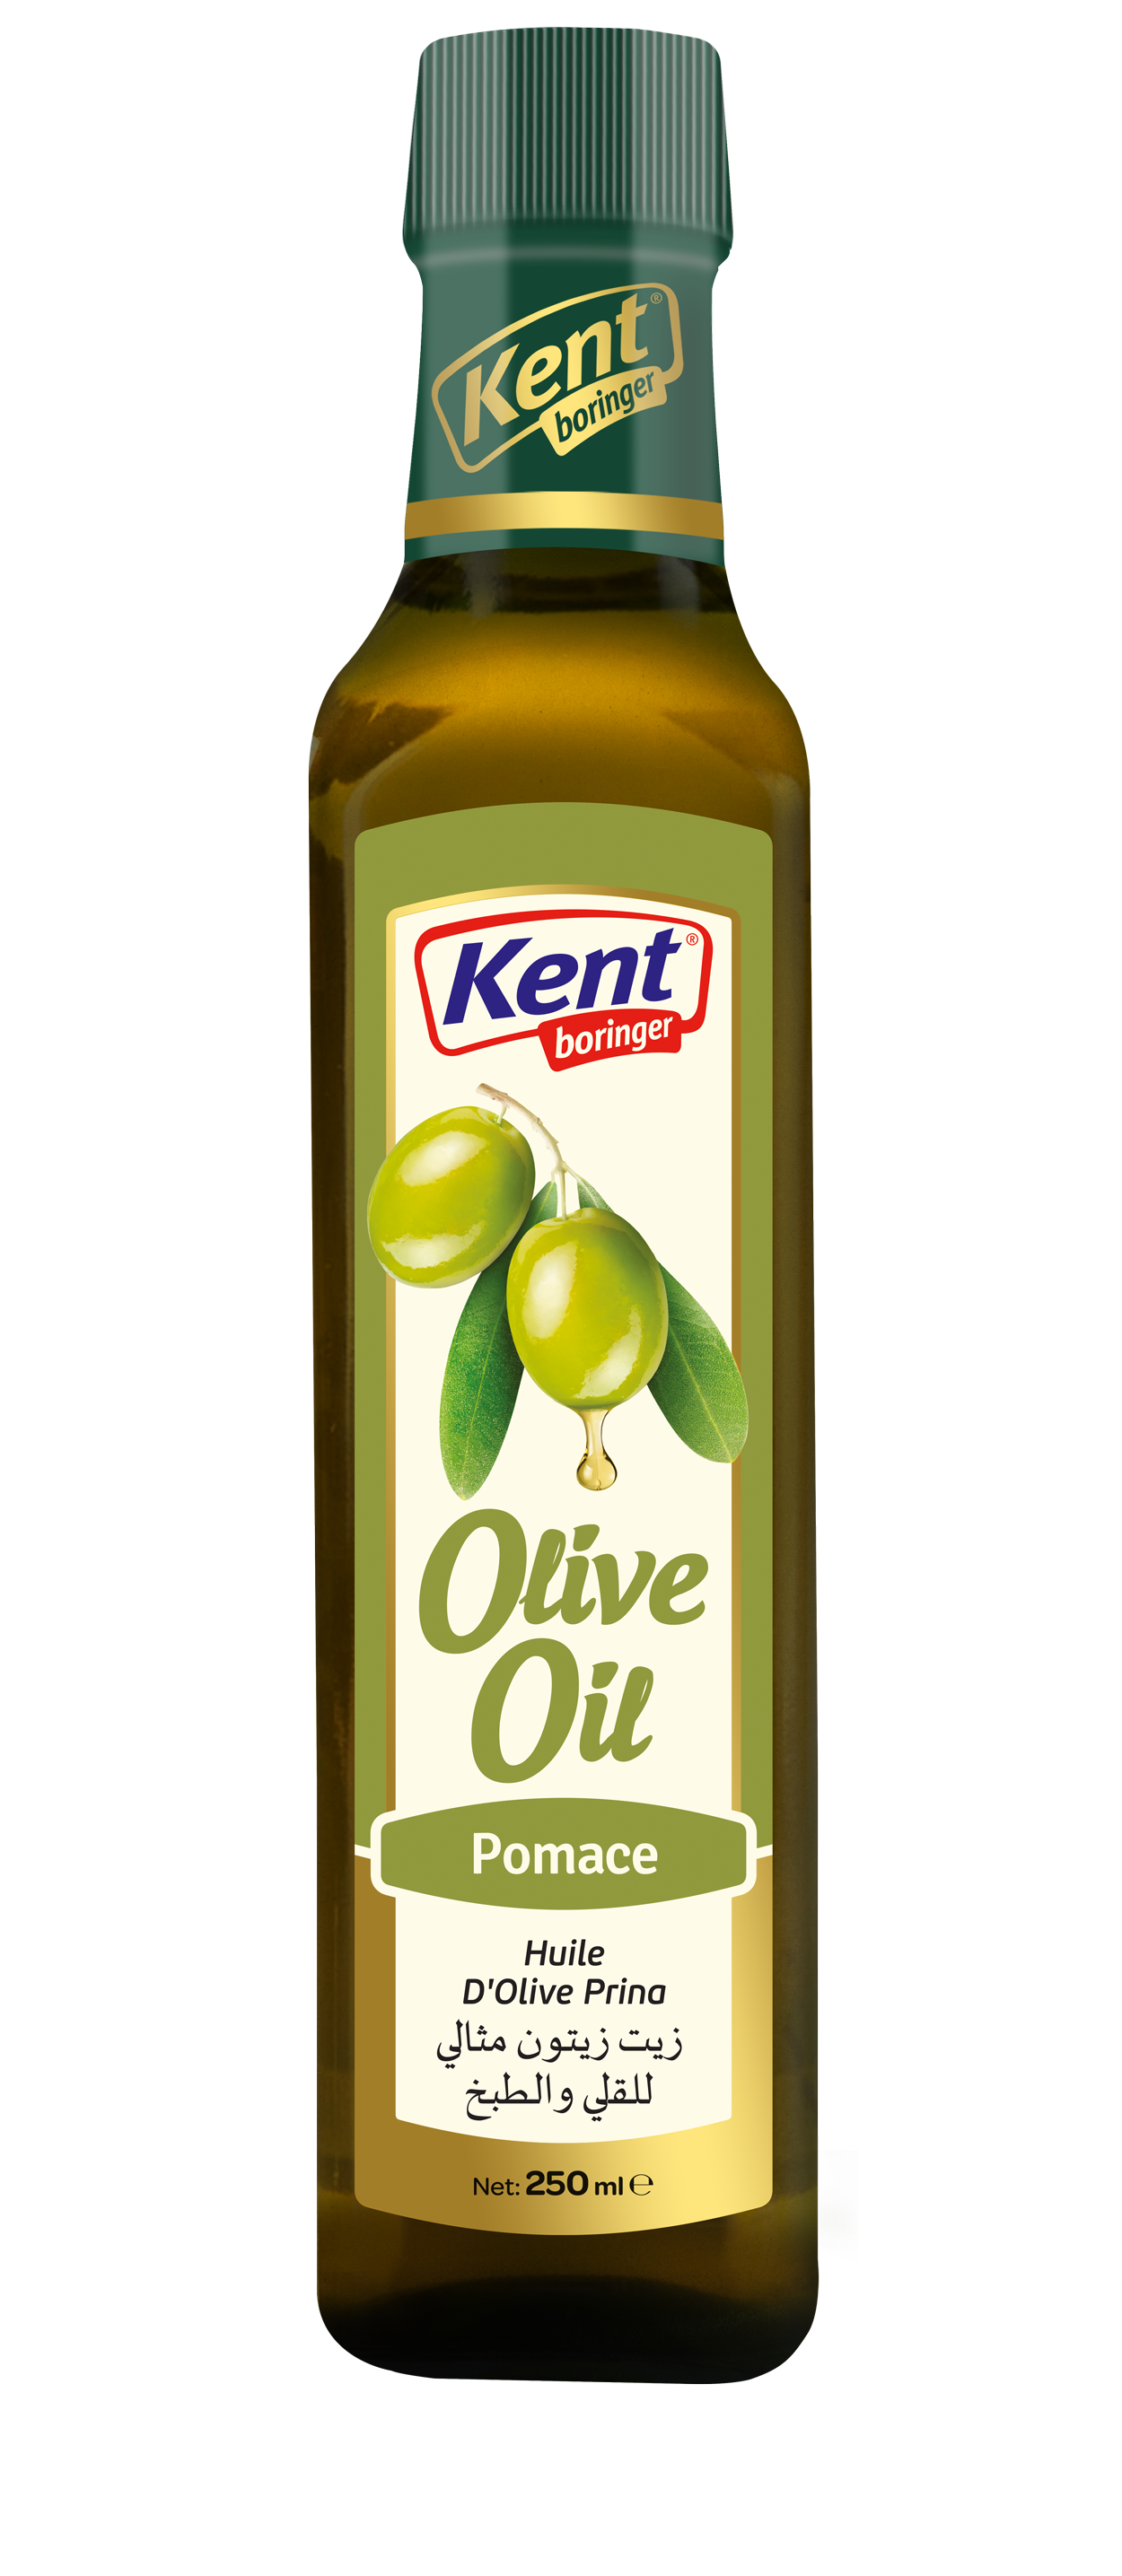 Оливковое масло Olive Oil Kent Boringer 250мл. Оливковое масло Pomace Olive Oil Kent 250мл*12шт. Оливковое масло "Kent Boringer" 100% Pure, 1 л. Масло оливковое Pomace "Kent" с/б 250мл.